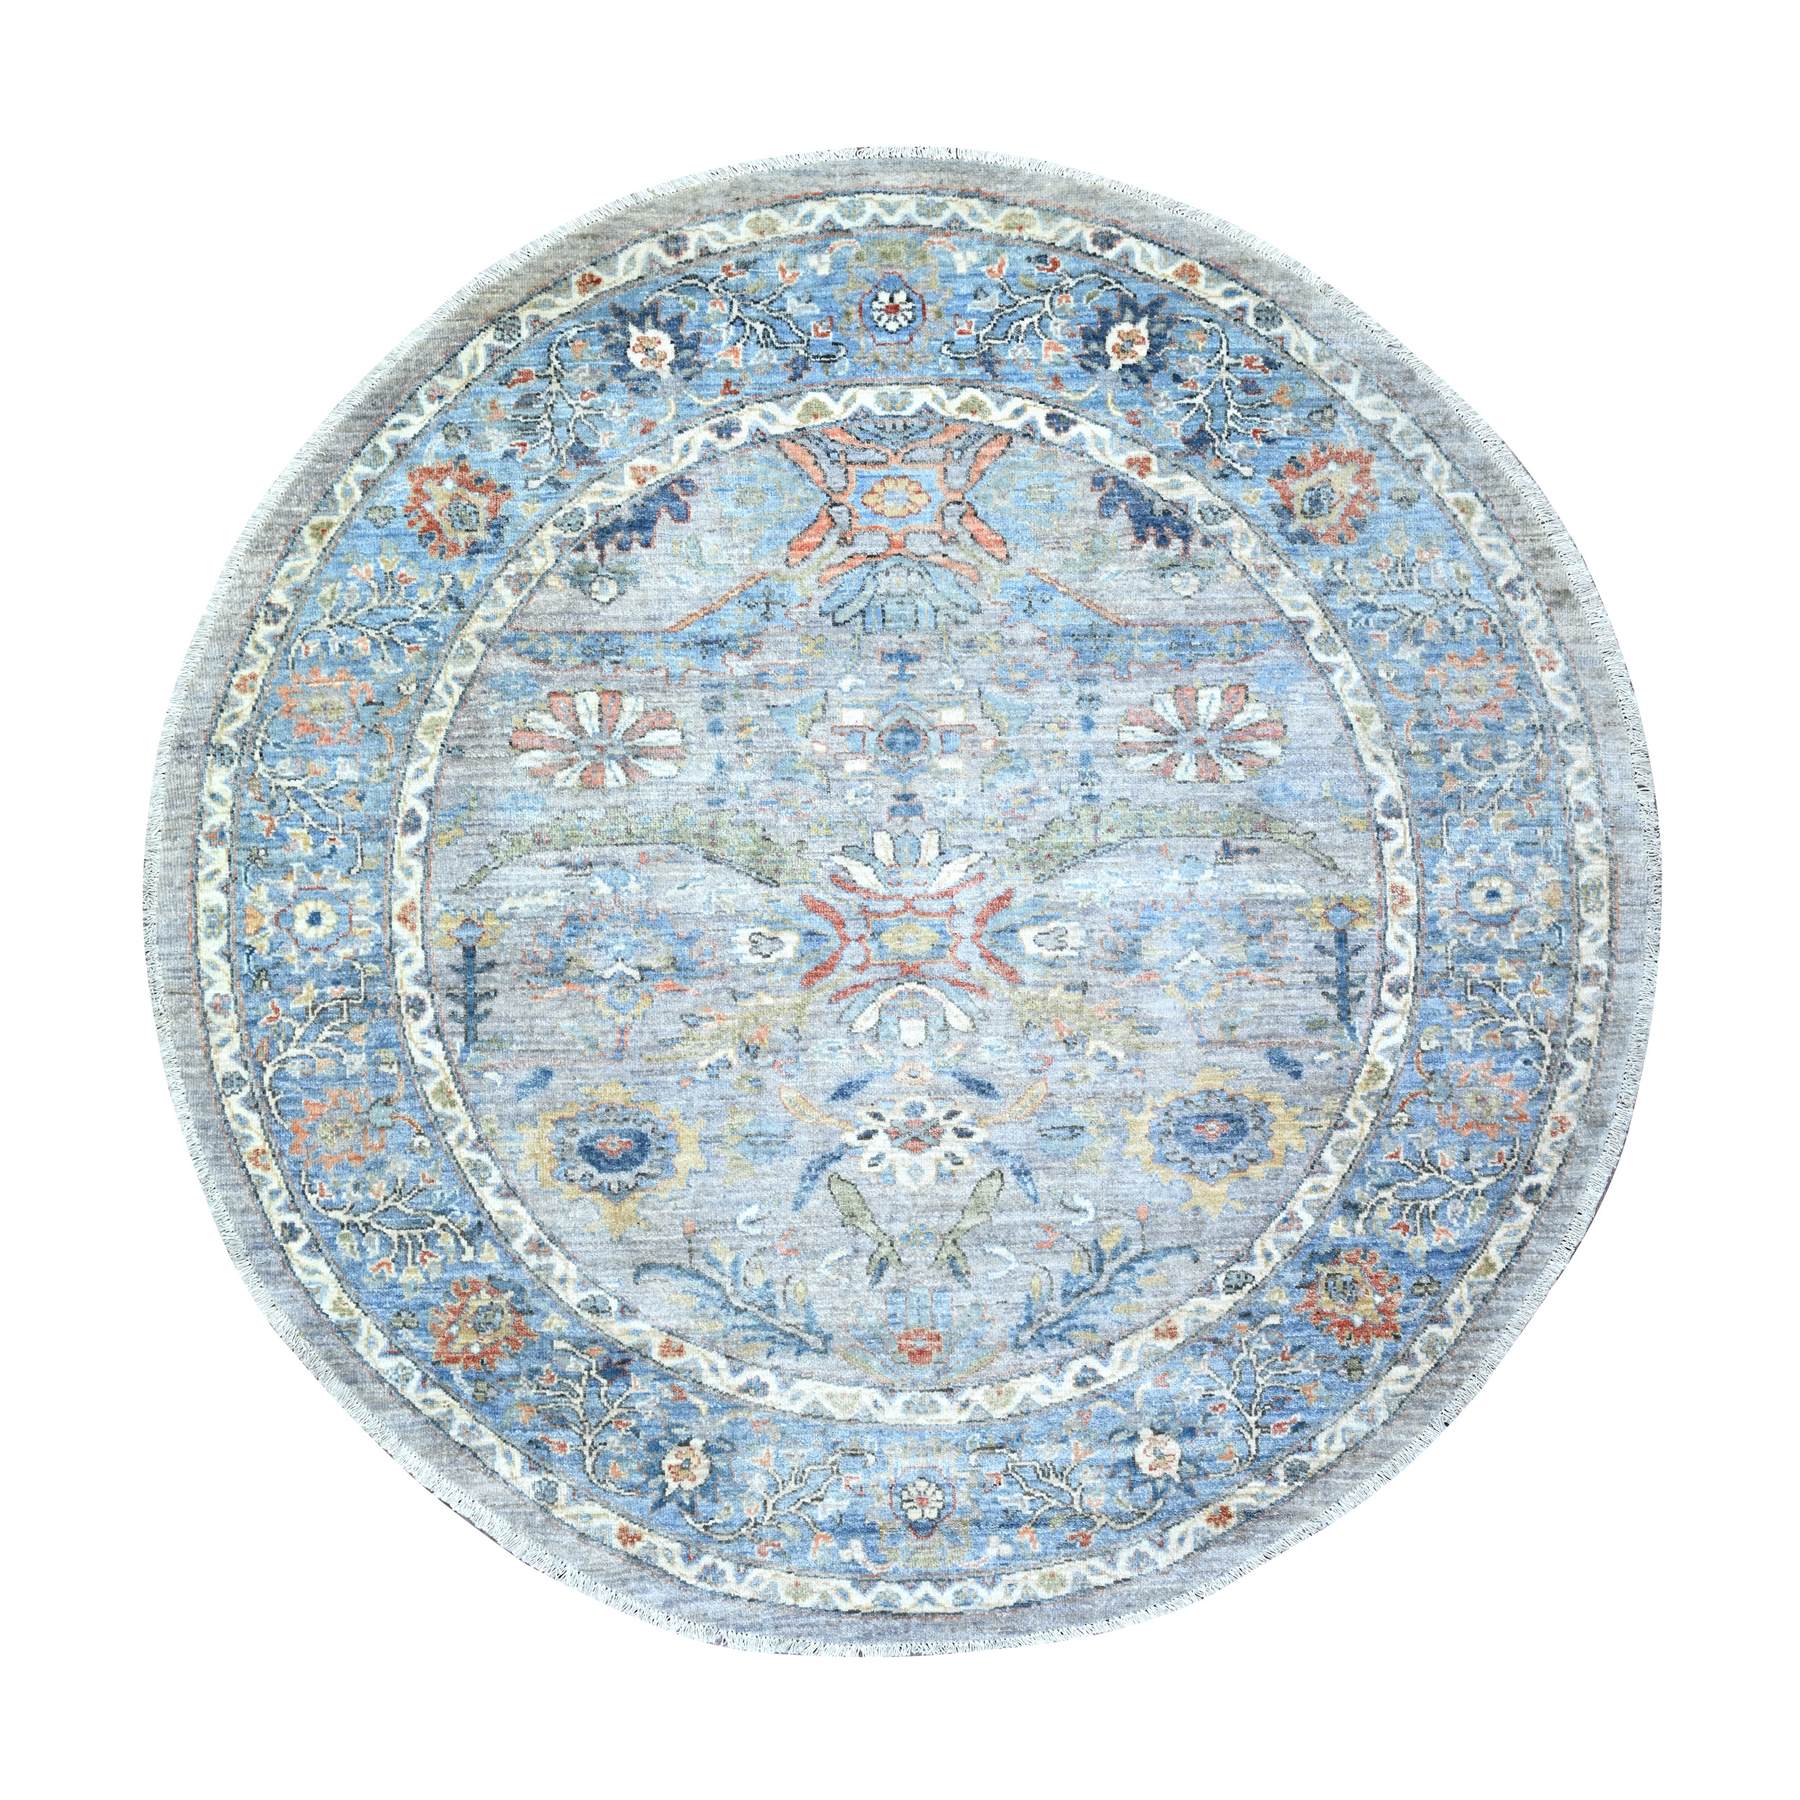 6'x6' Blue Gray, Ziegler Mahal, Hand Woven, Pure Shiny Wool, Vegetable Dyes, Round Oriental Rug 